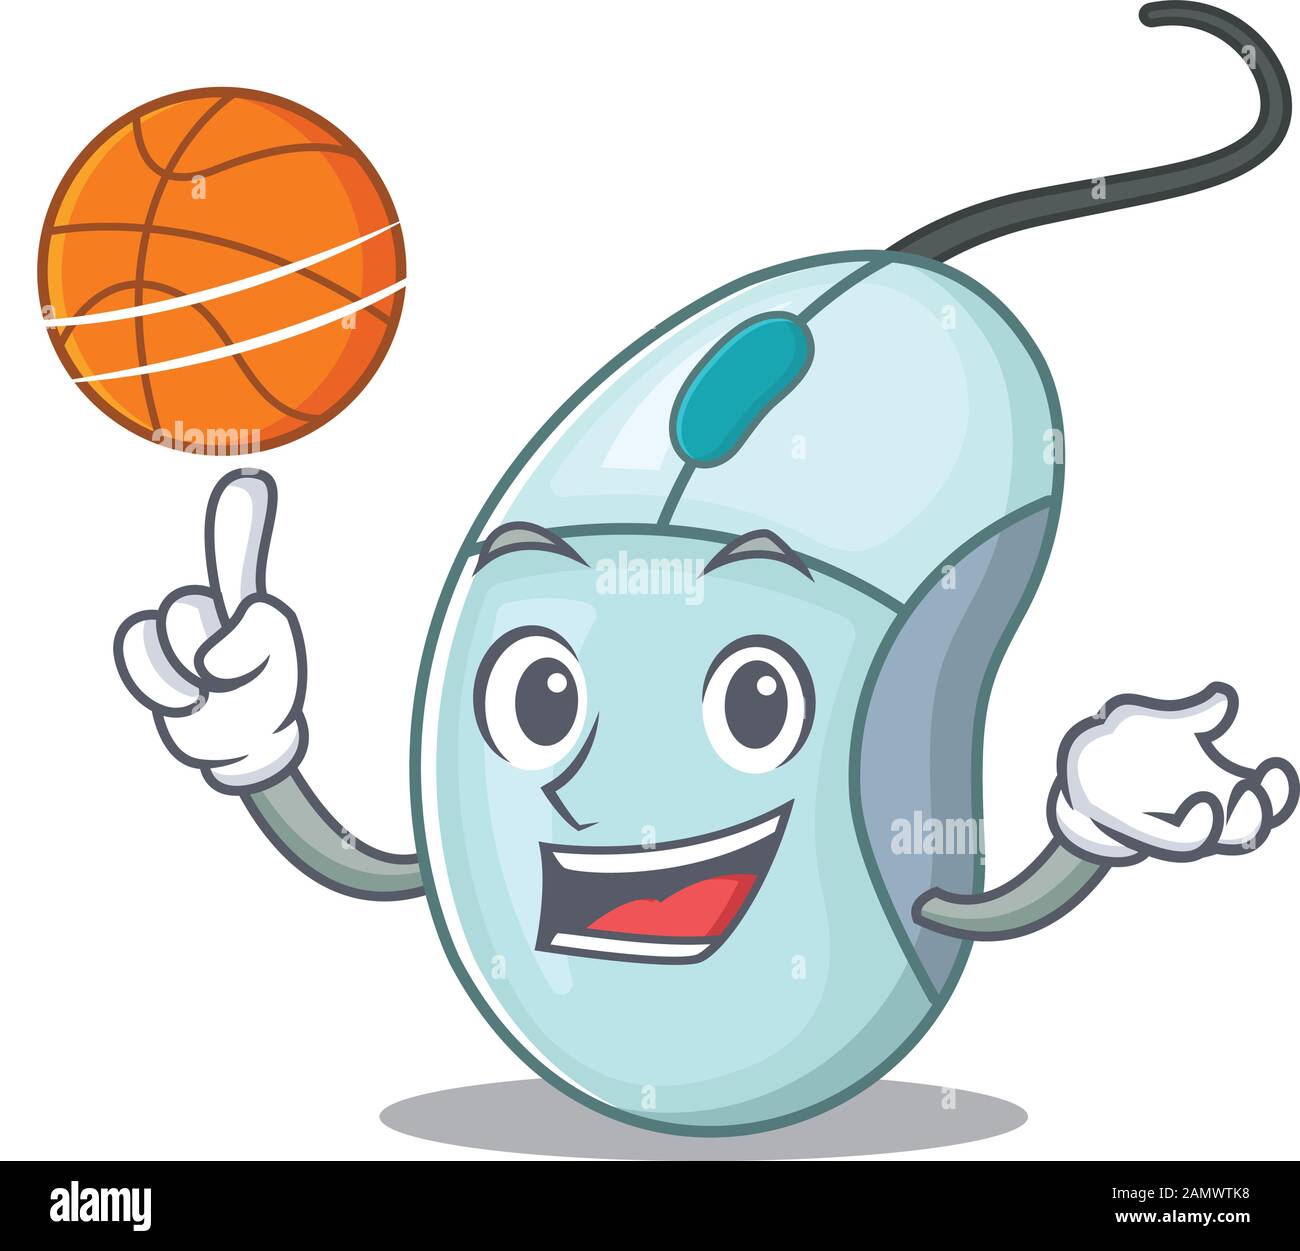 https://c8.alamy.com/comp/2AMWTK8/a-mascot-picture-of-computer-mouse-cartoon-character-playing-basketball-2AMWTK8.jpg